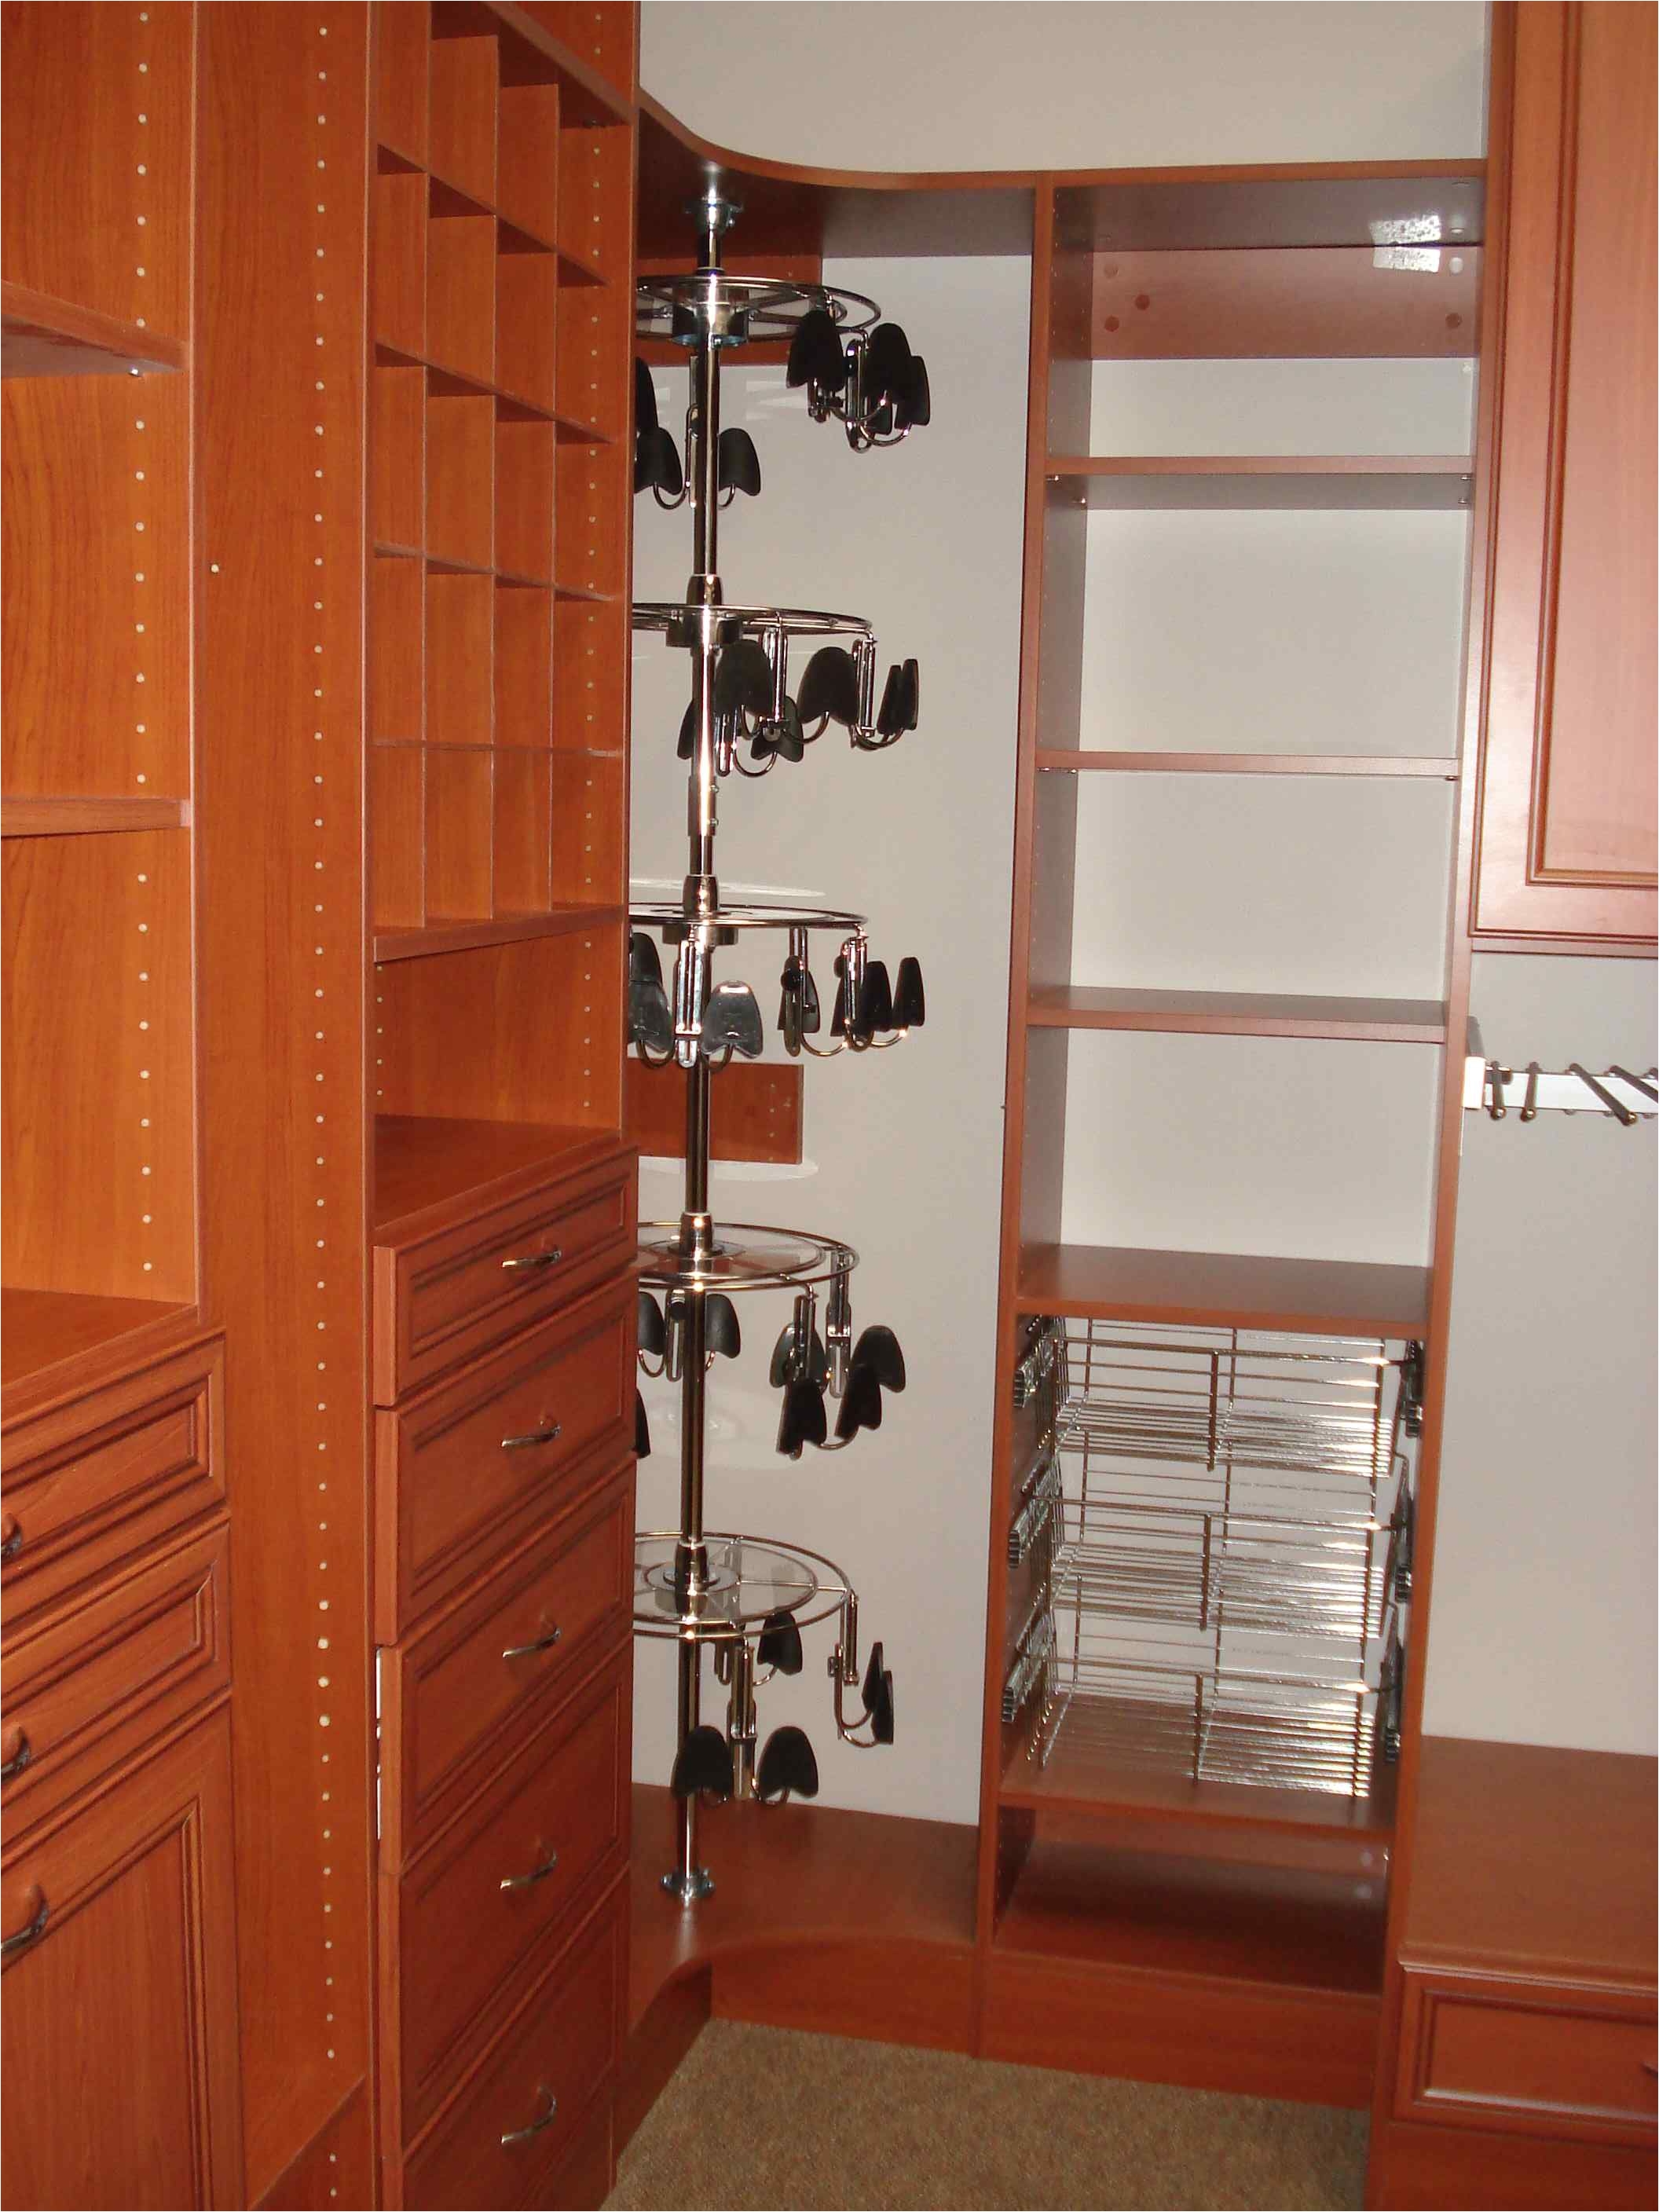 Floor to Ceiling Shoe Rack Rev A Shelf Shoe Carousel In Our Showroom A Great Idea for the Shoe